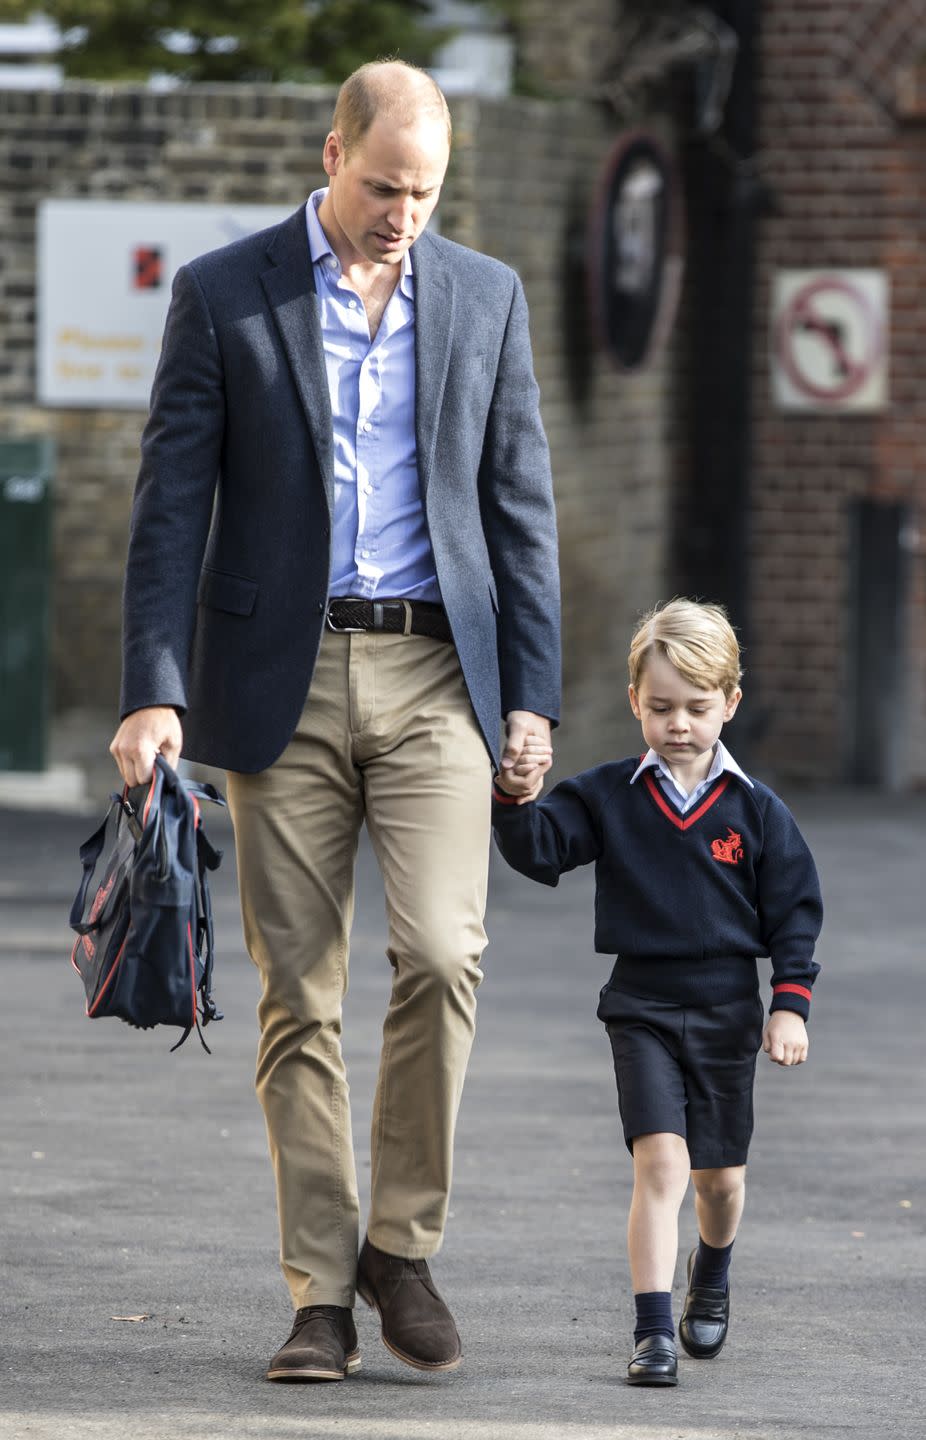 <p>When Prince George was just 2 and a half years old, he started attending a private school close to Kensington Palace. Princess Charlotte is now enrolled in nursery school as well.</p>